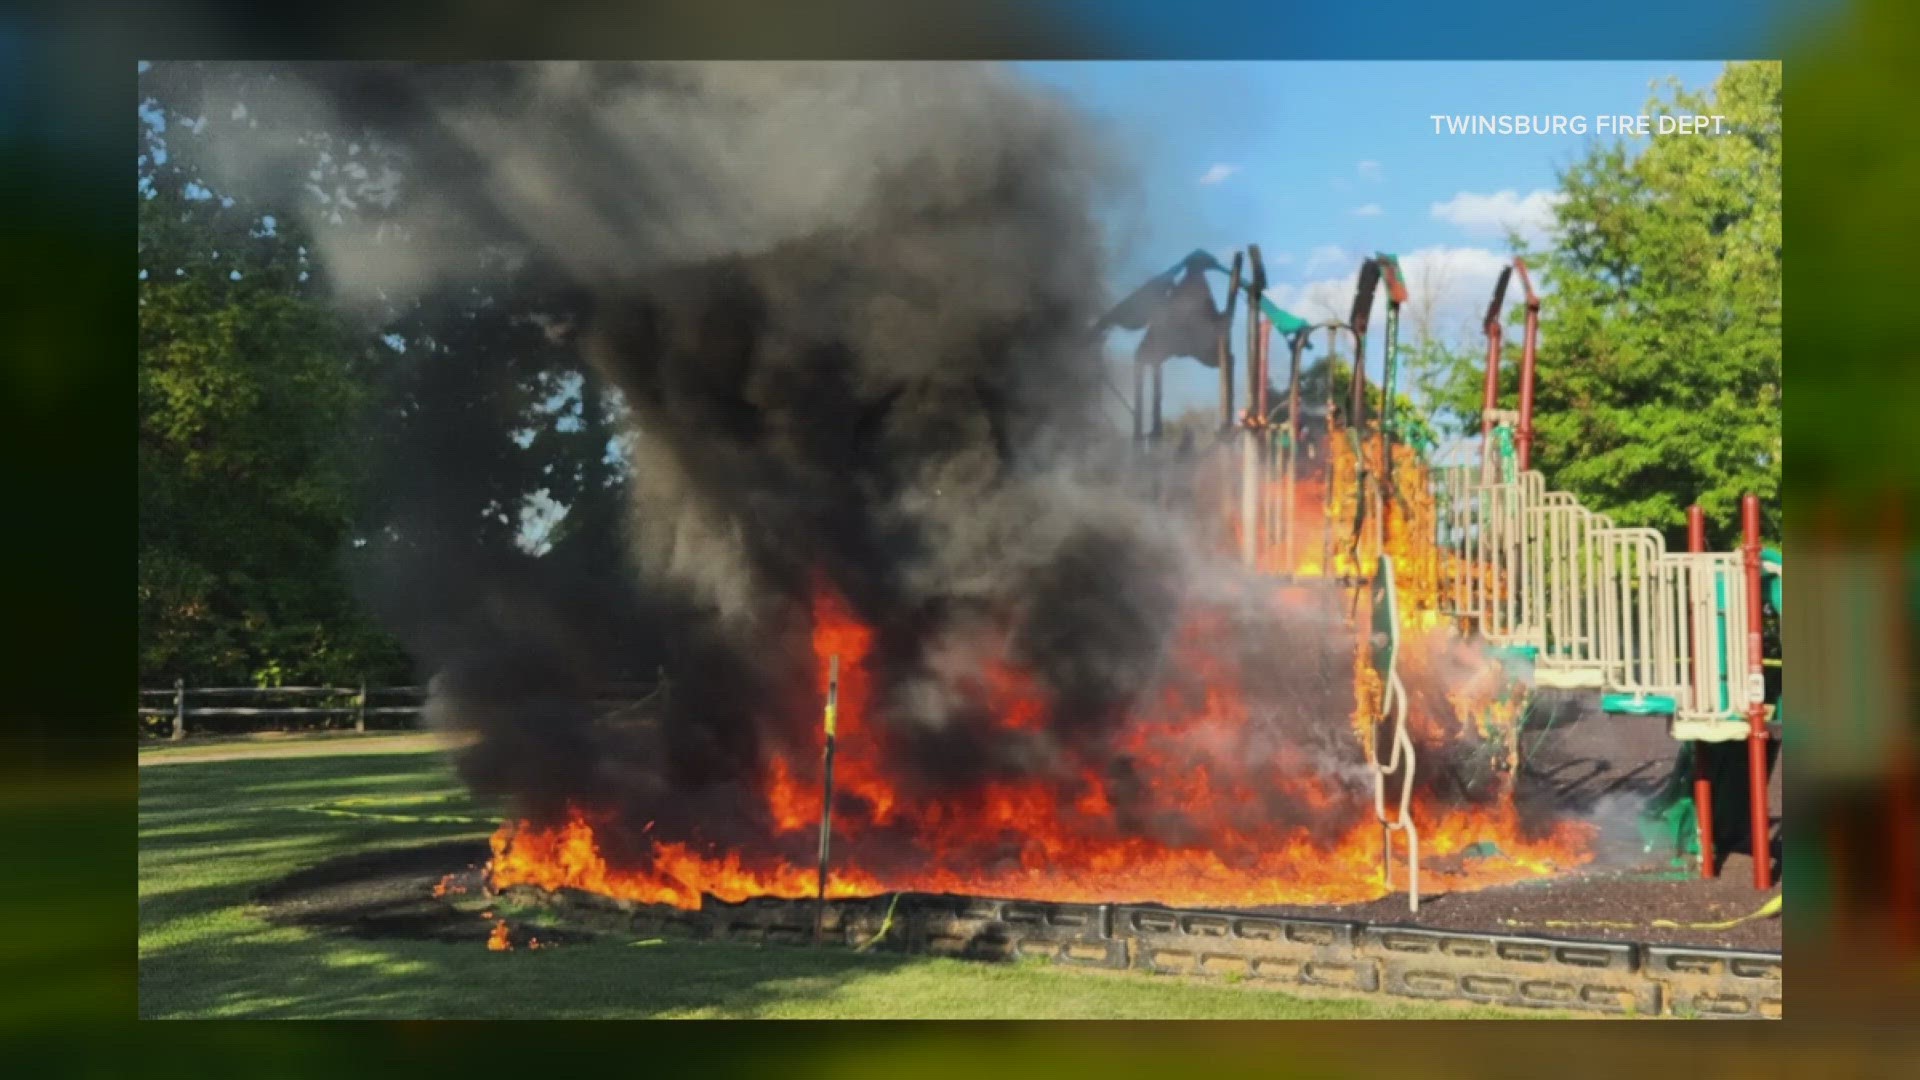 The playground at the Twinsburg Heights Community Garden also caught fire on Sept. 4. The investigation has been turned over to the Summit County Sheriff's Office.